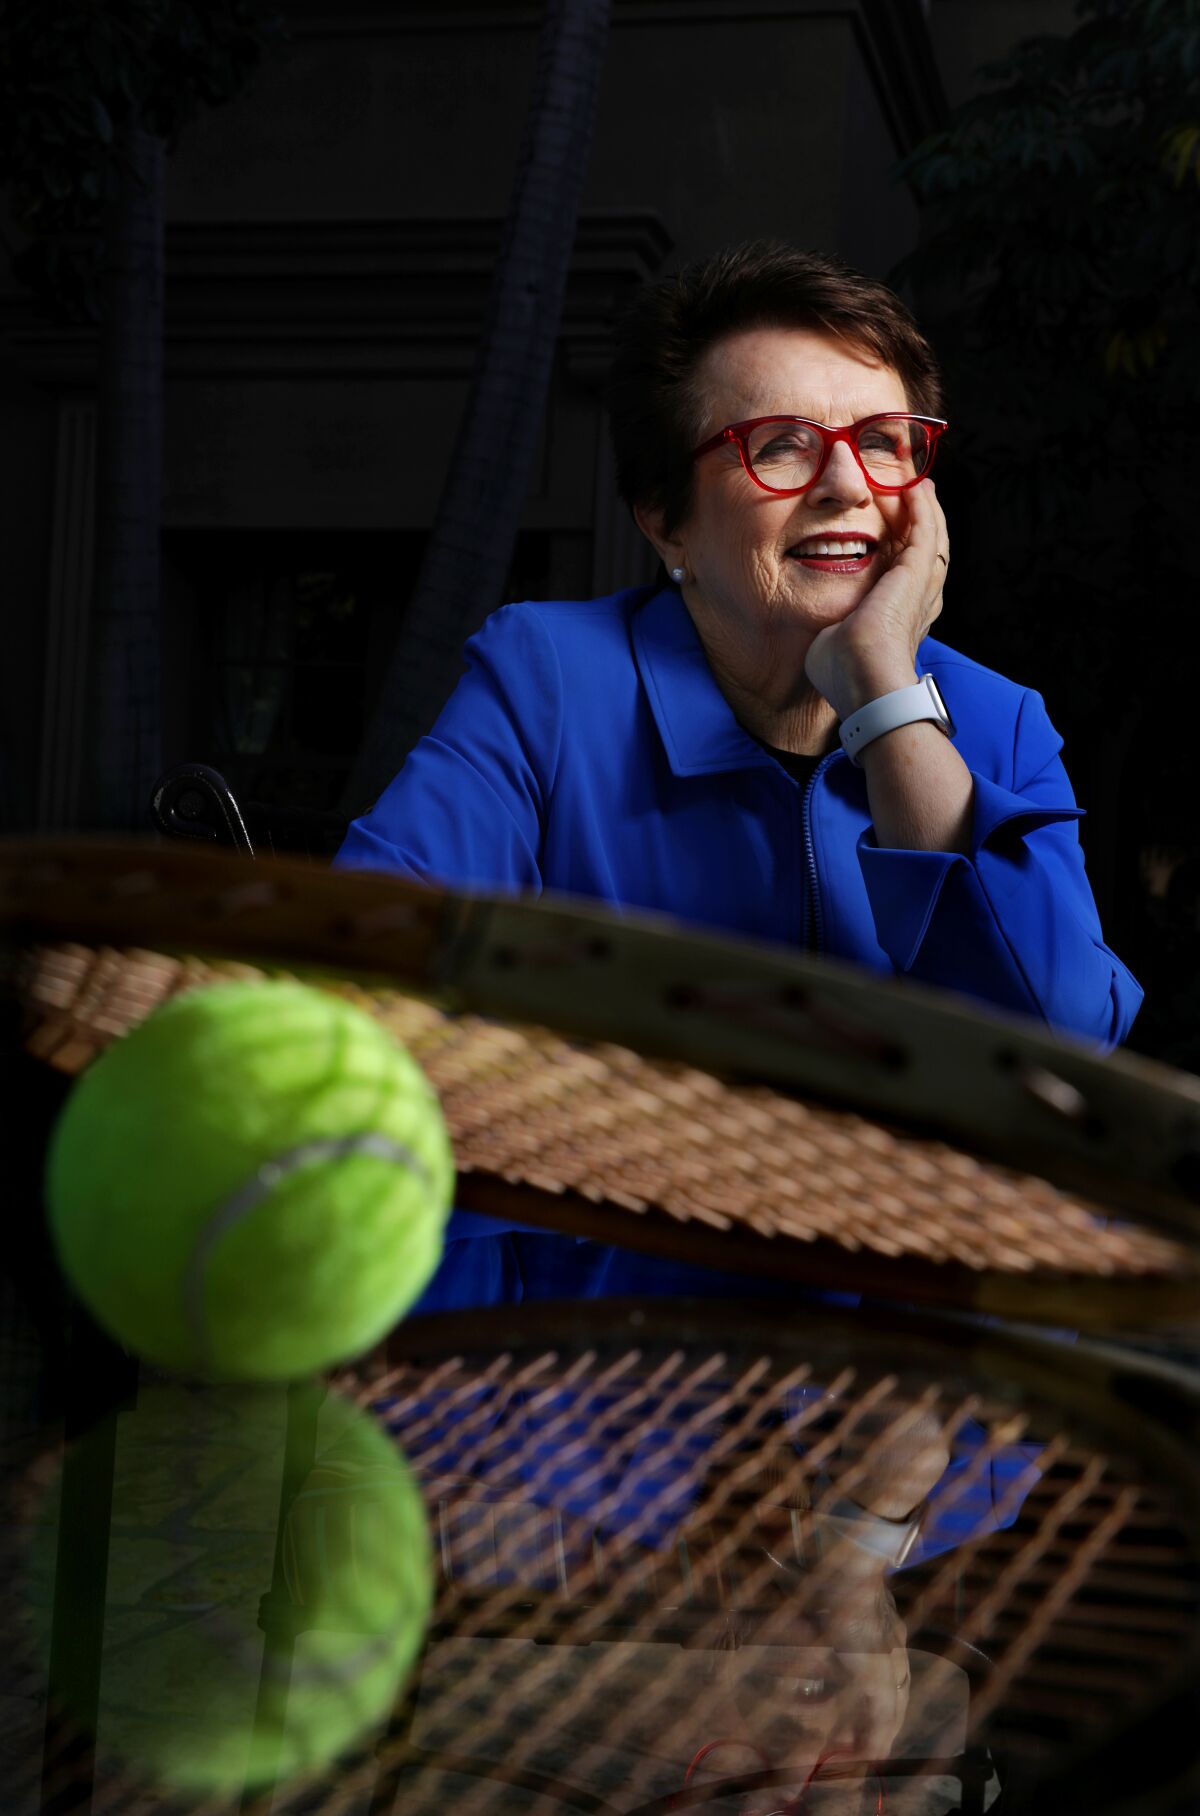 Billie Jean King in a blue jacket, seated, with a tennis ball and racket in the foreground.